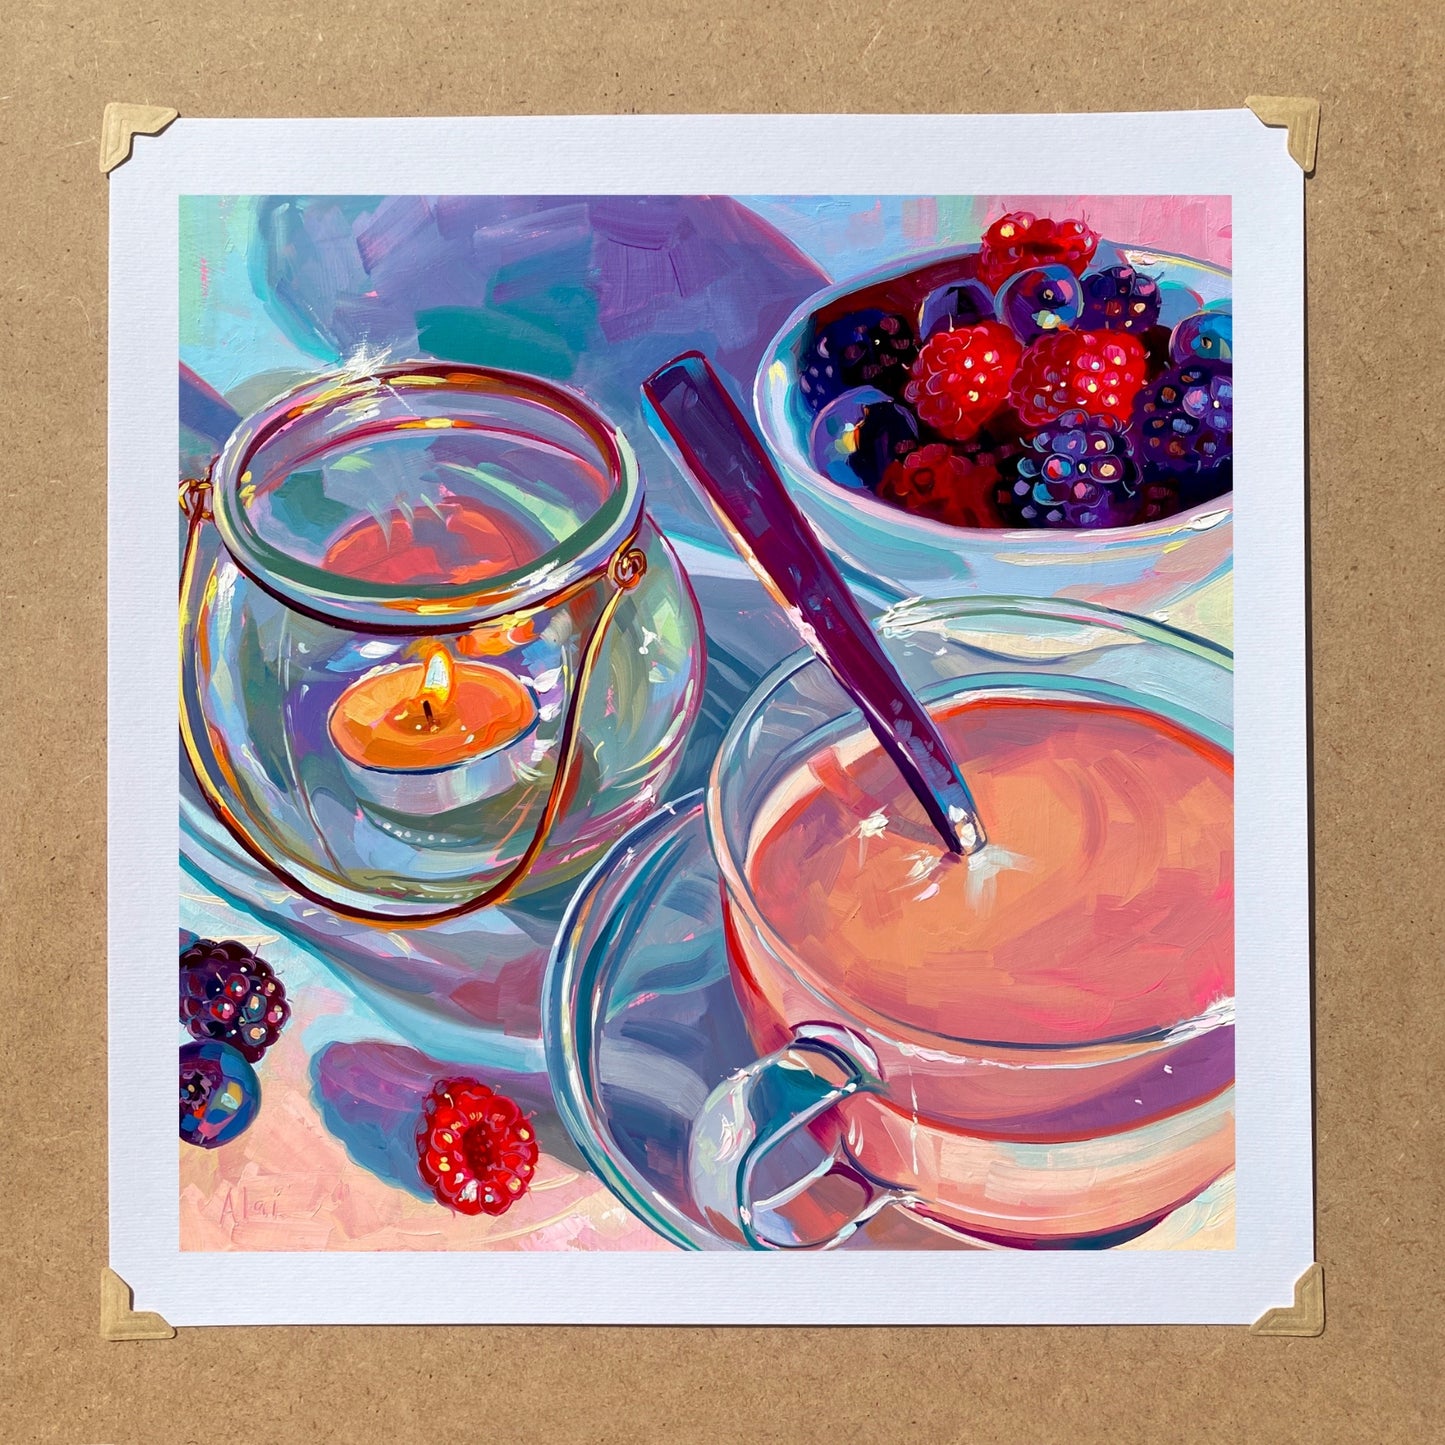 Candle, coffee and berry bowl - Oil painting Print